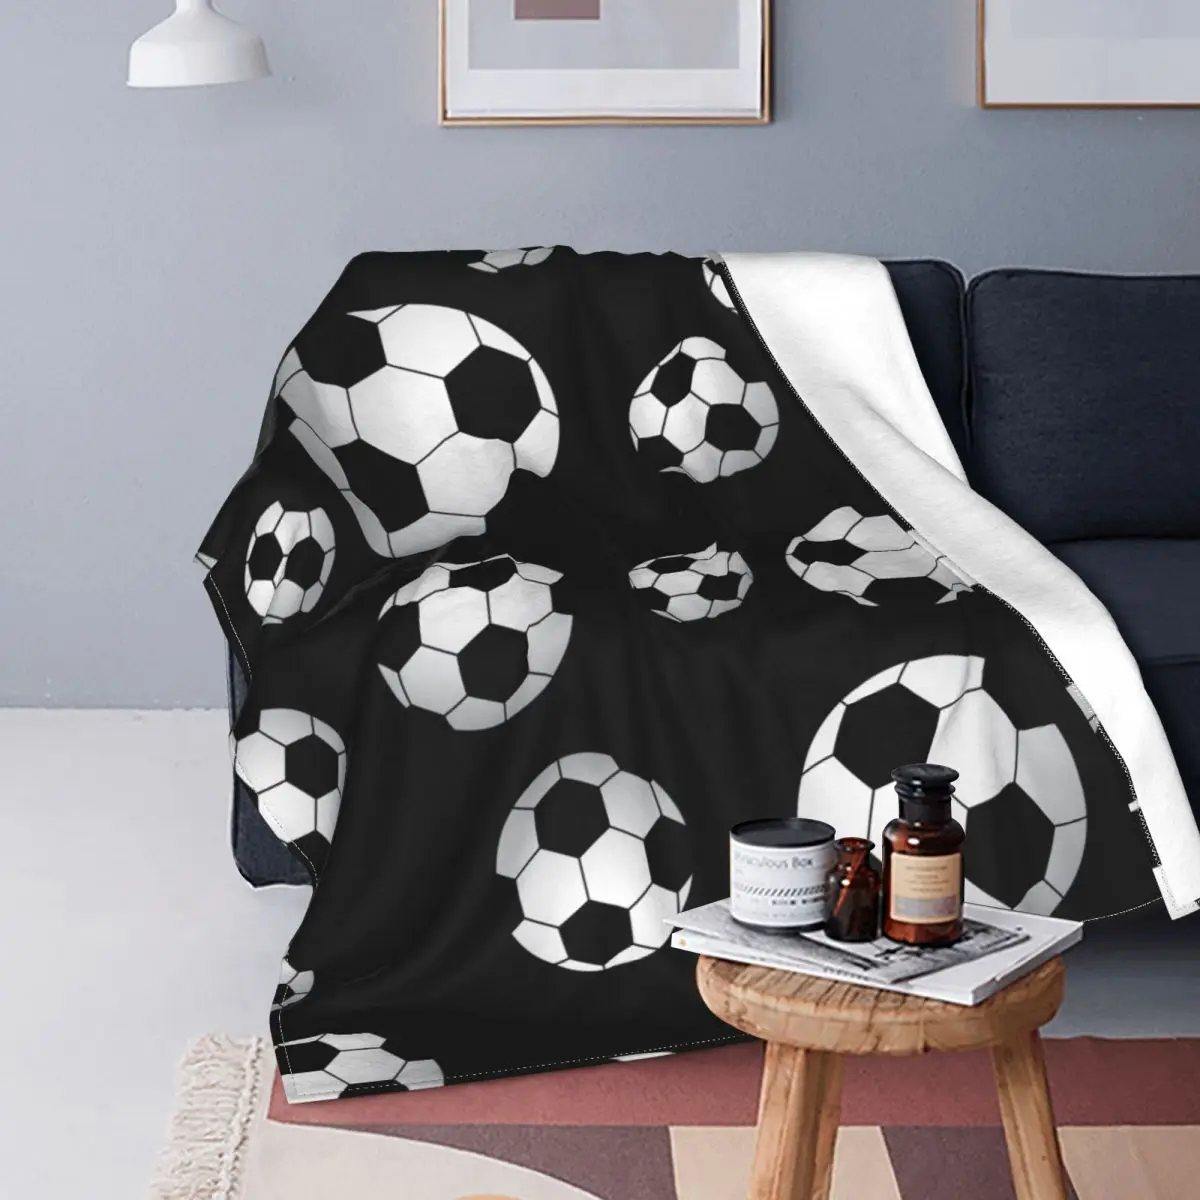 

Soccer Pattern Knitted Blanket Football Balls Sports Flannel Throw Blankets Home Couch Personalised Ultra-Soft Warm Bedsprea 09